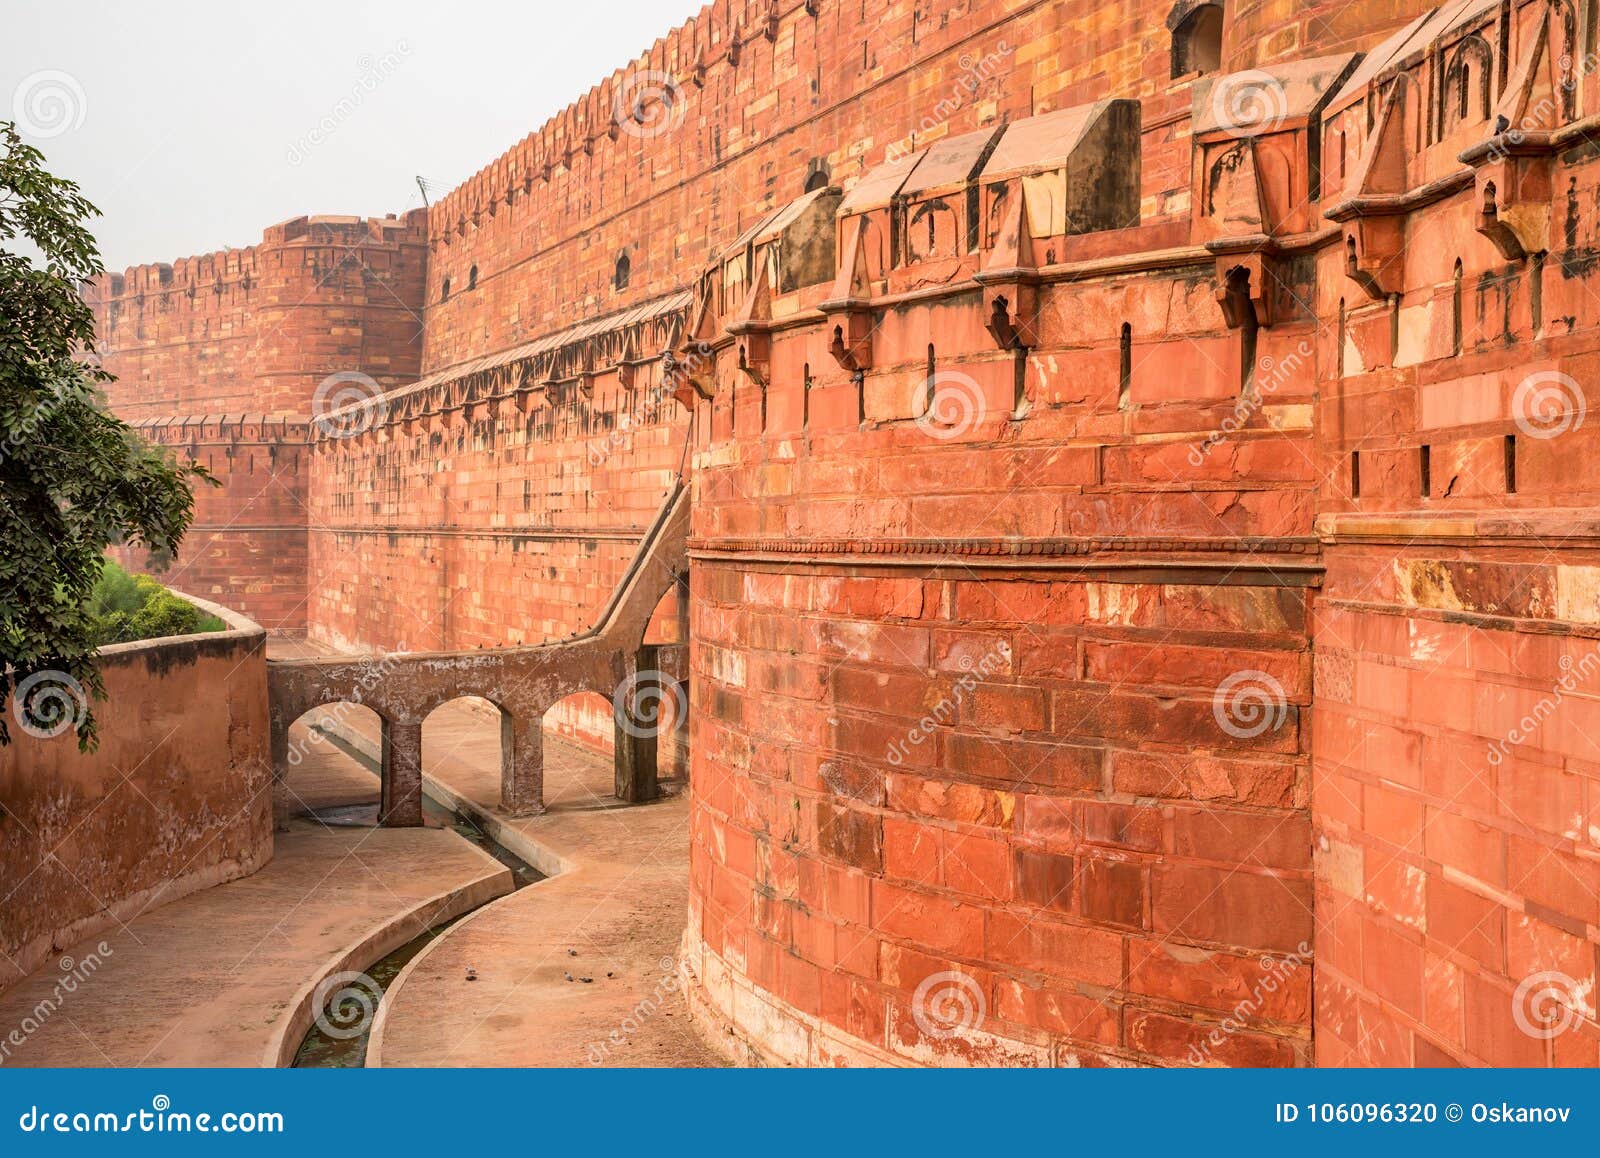 Red Fort Situated In Agra India Stock Photo Image Of Gate